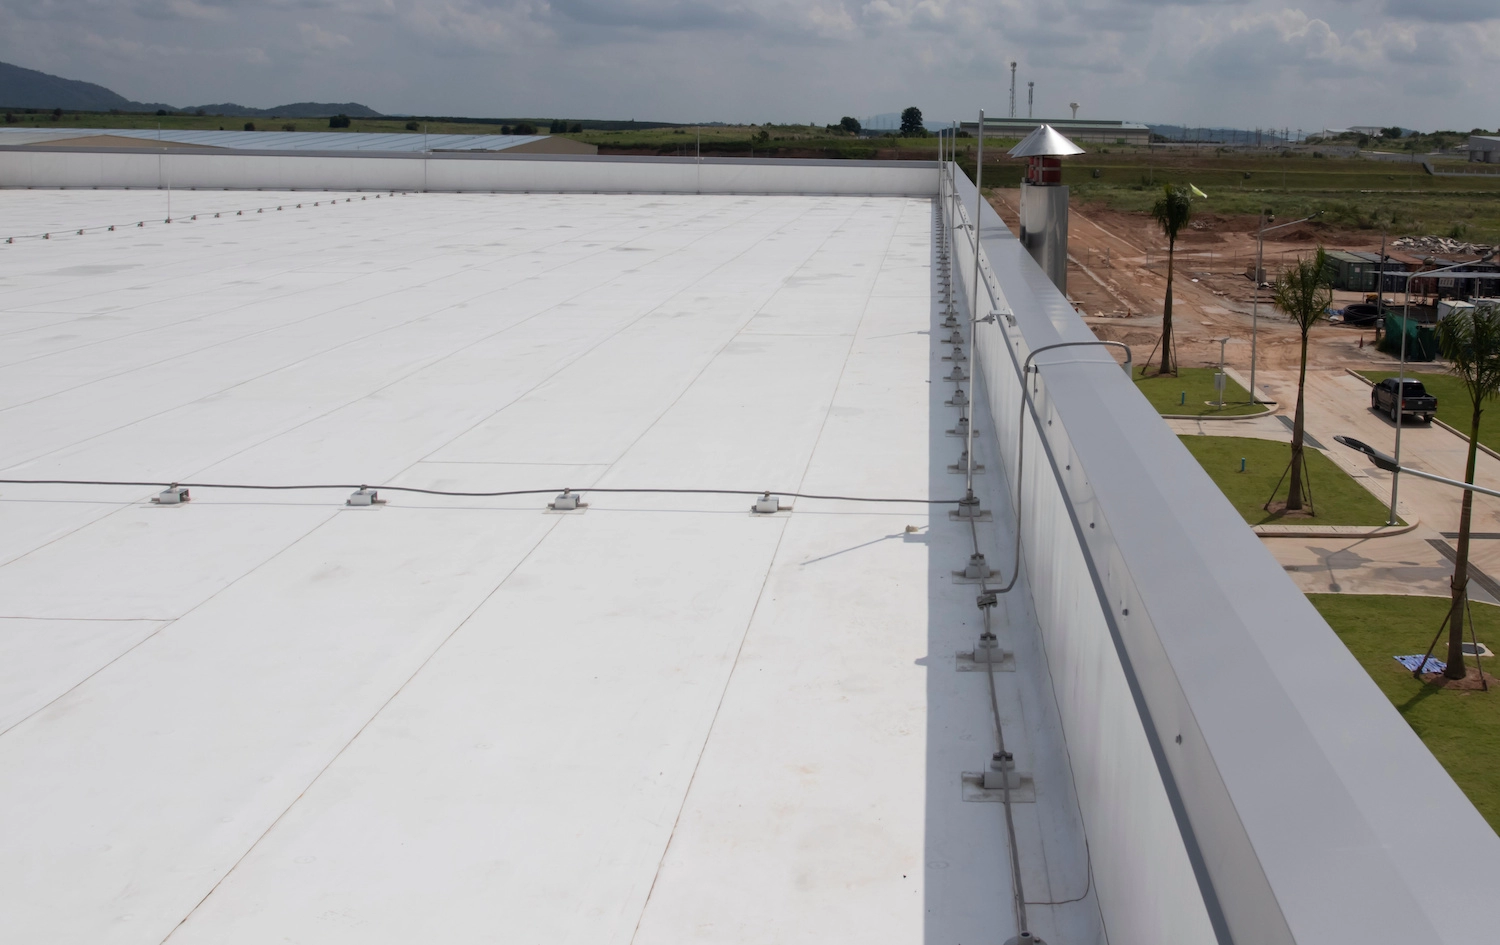 commercial roofing systems pvc roof